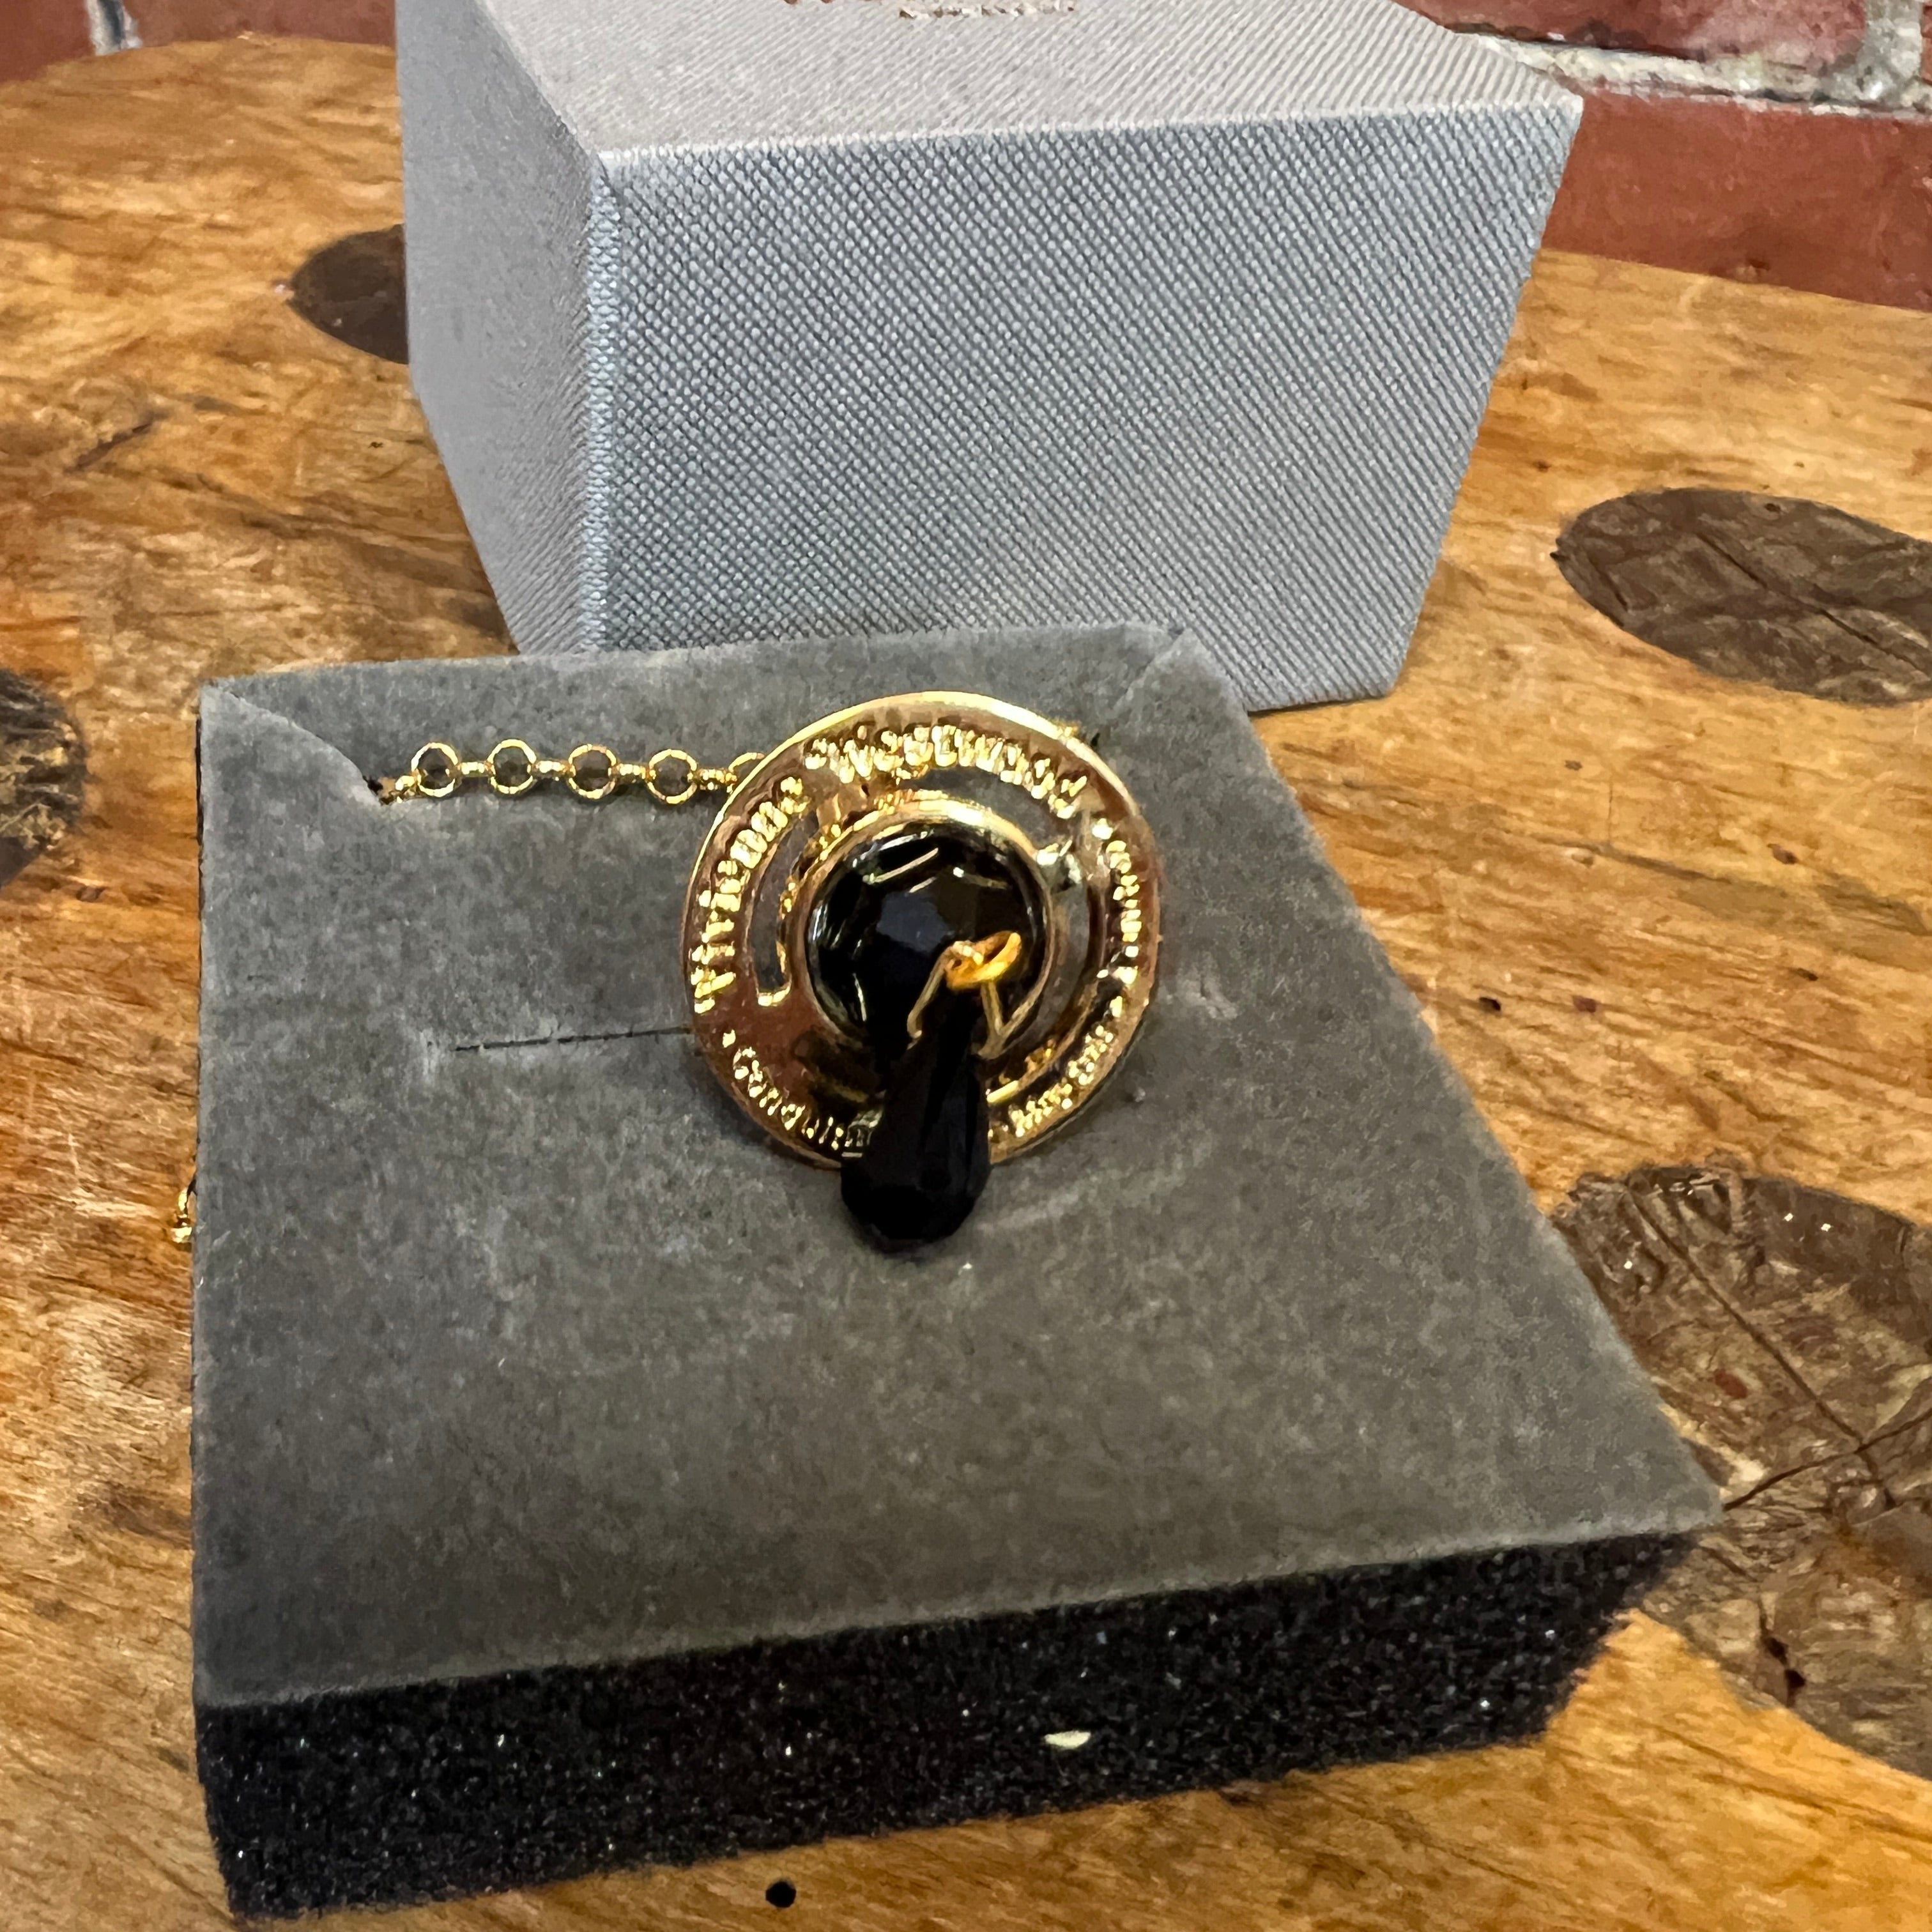 VIVIENNE WESTWOOD Gold orb necklace in box